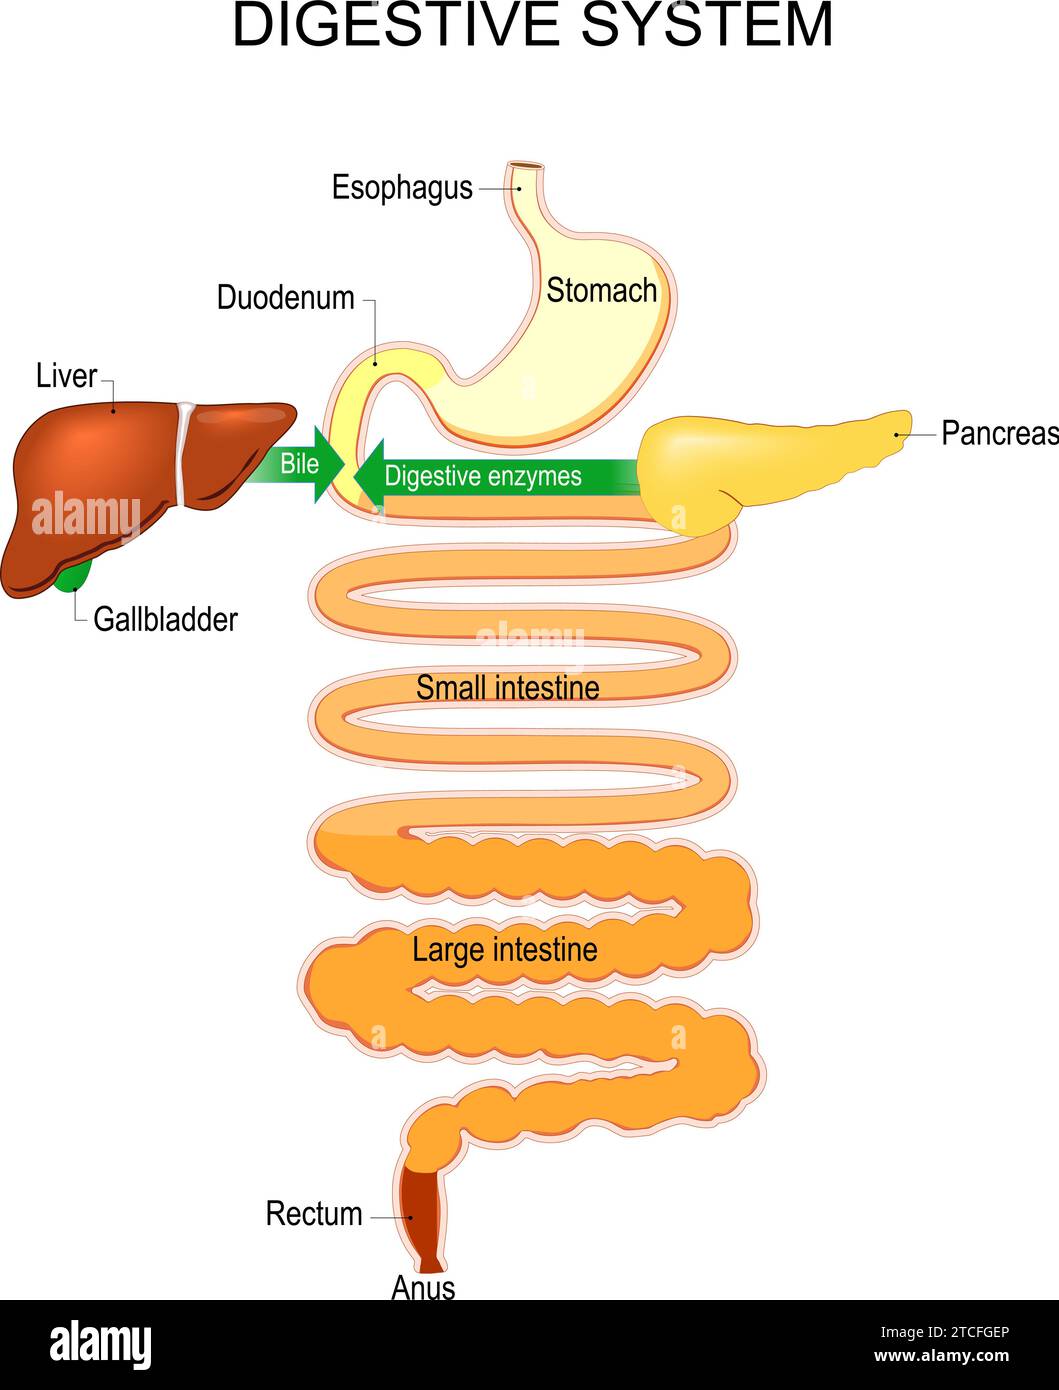 Part of a Human Digestive system. Esophagus, Stomach, Duodenum, Small and Large intestine, Rectum. Digestion process from dissolution to absorption an Stock Vector